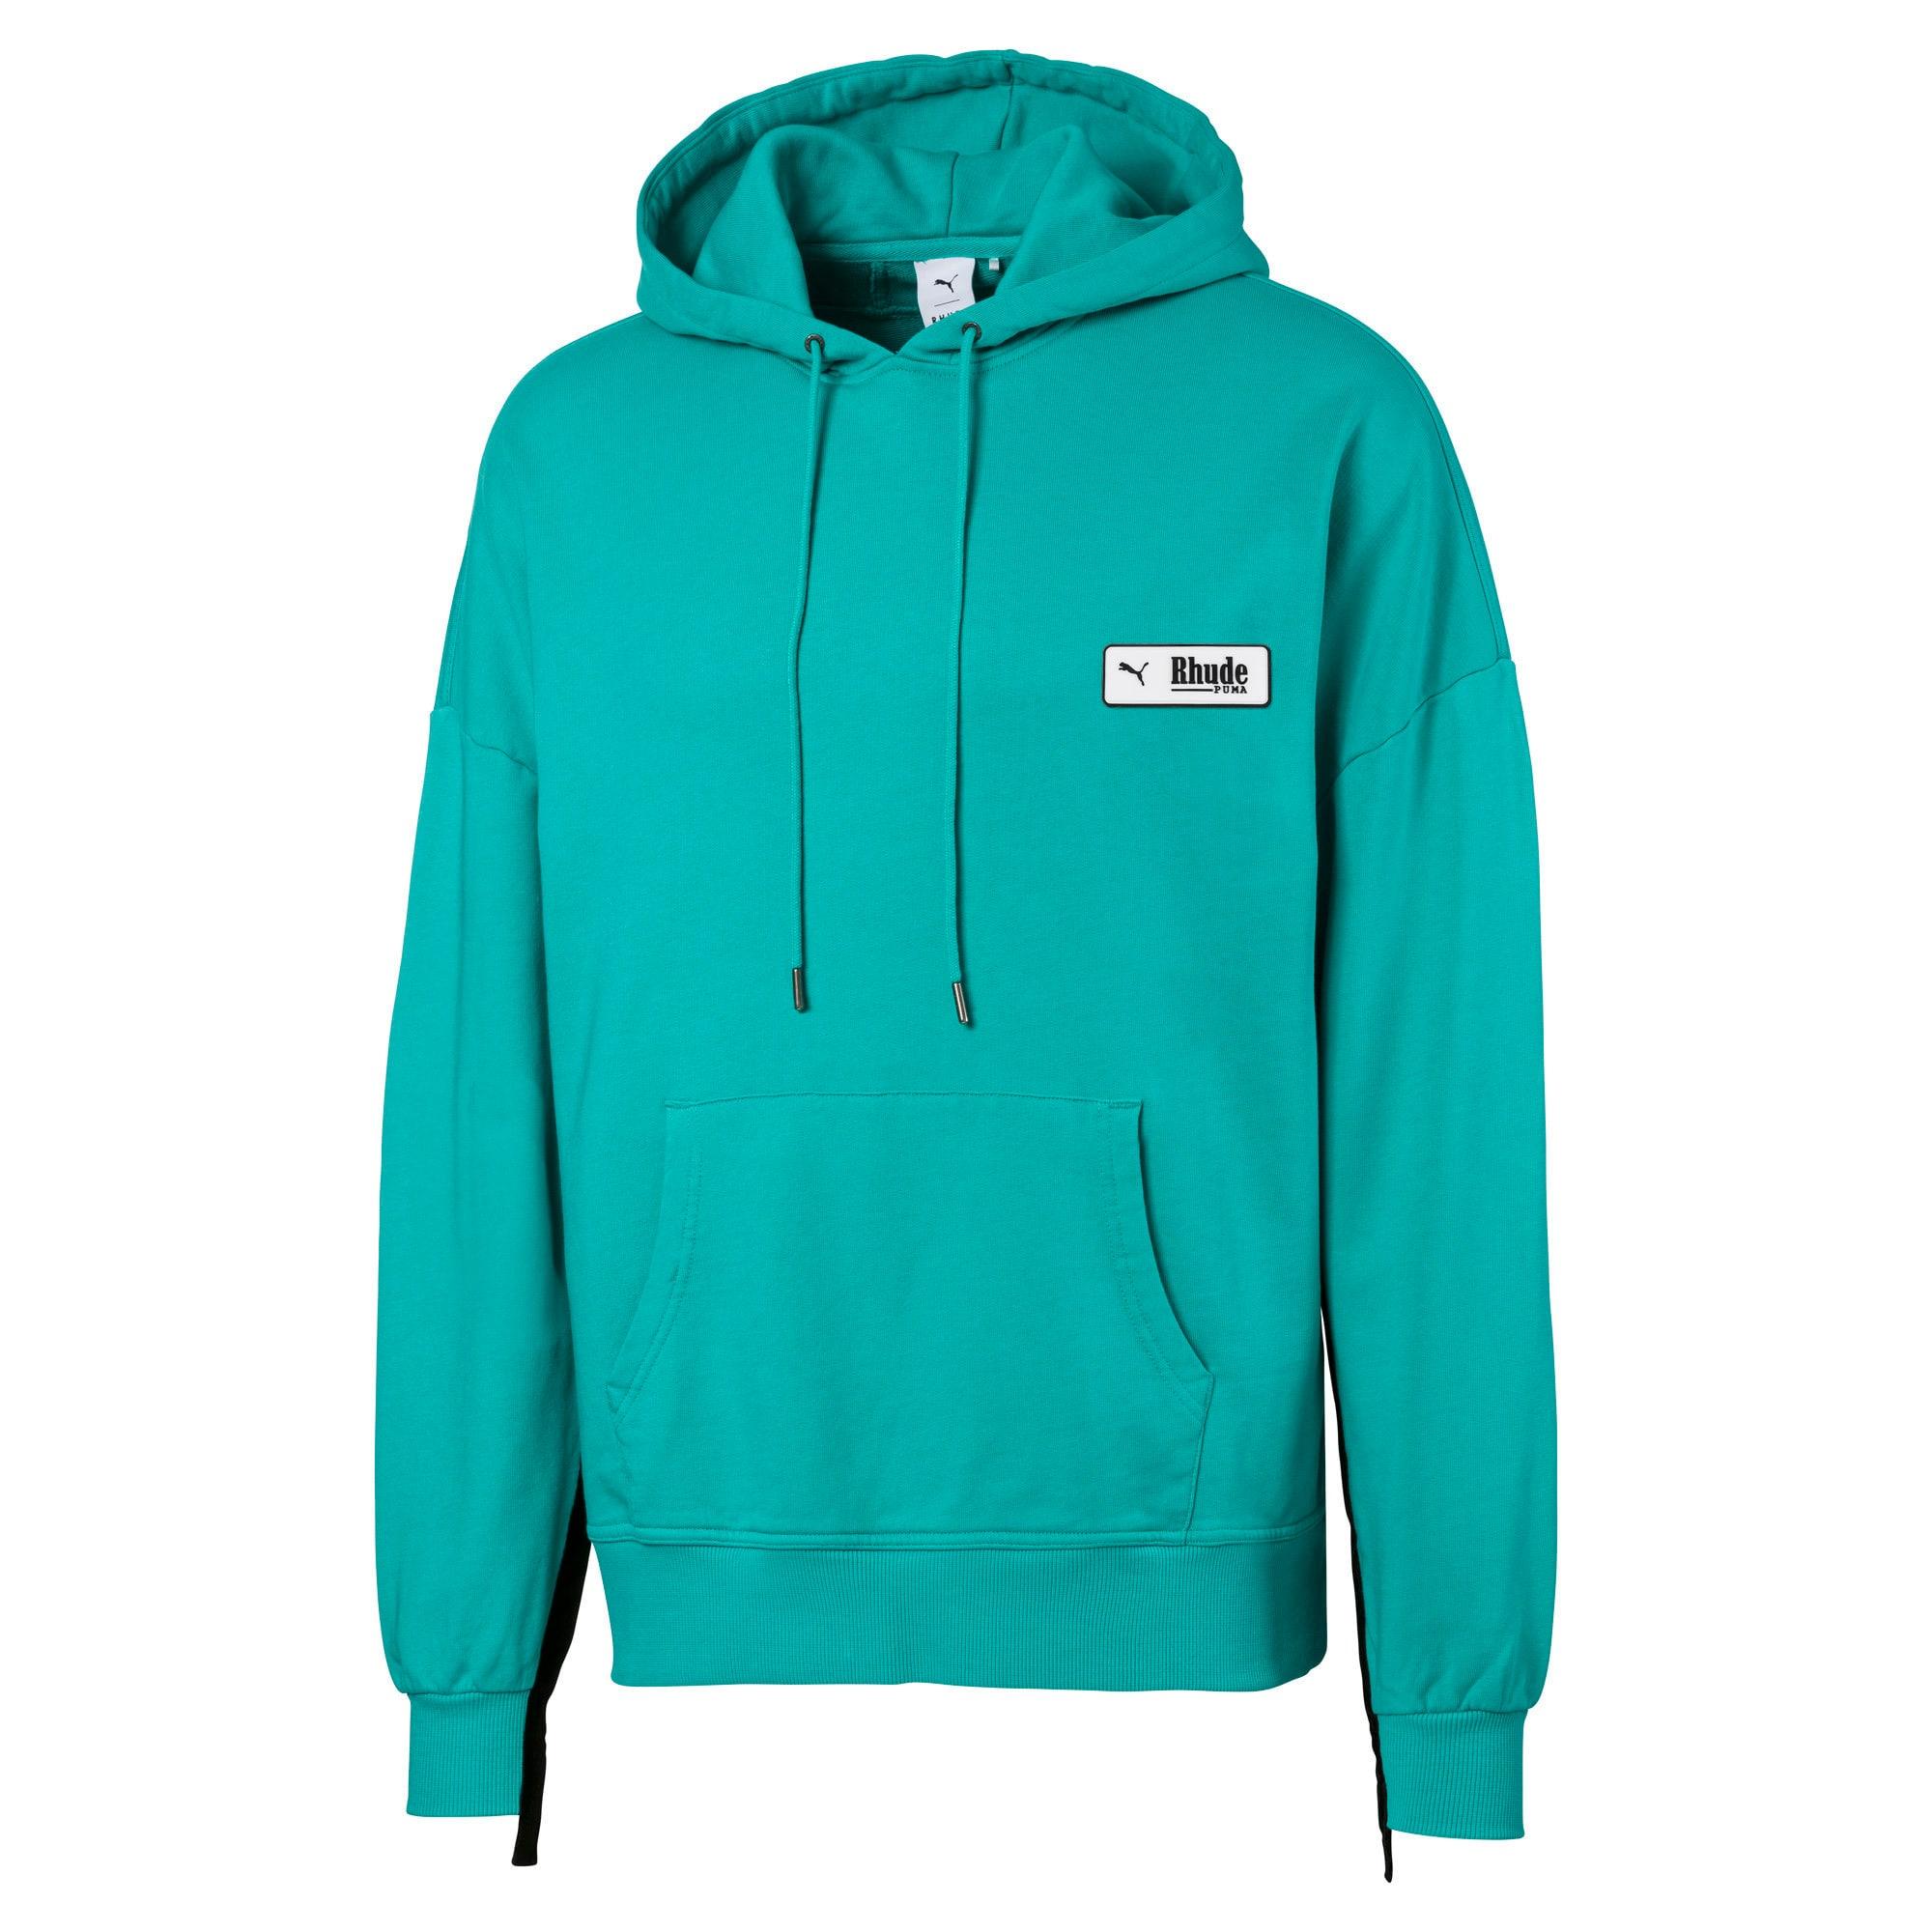 PUMA Cotton X Rhude Men's Hoodie in Blue Turquoise (Blue) - Lyst